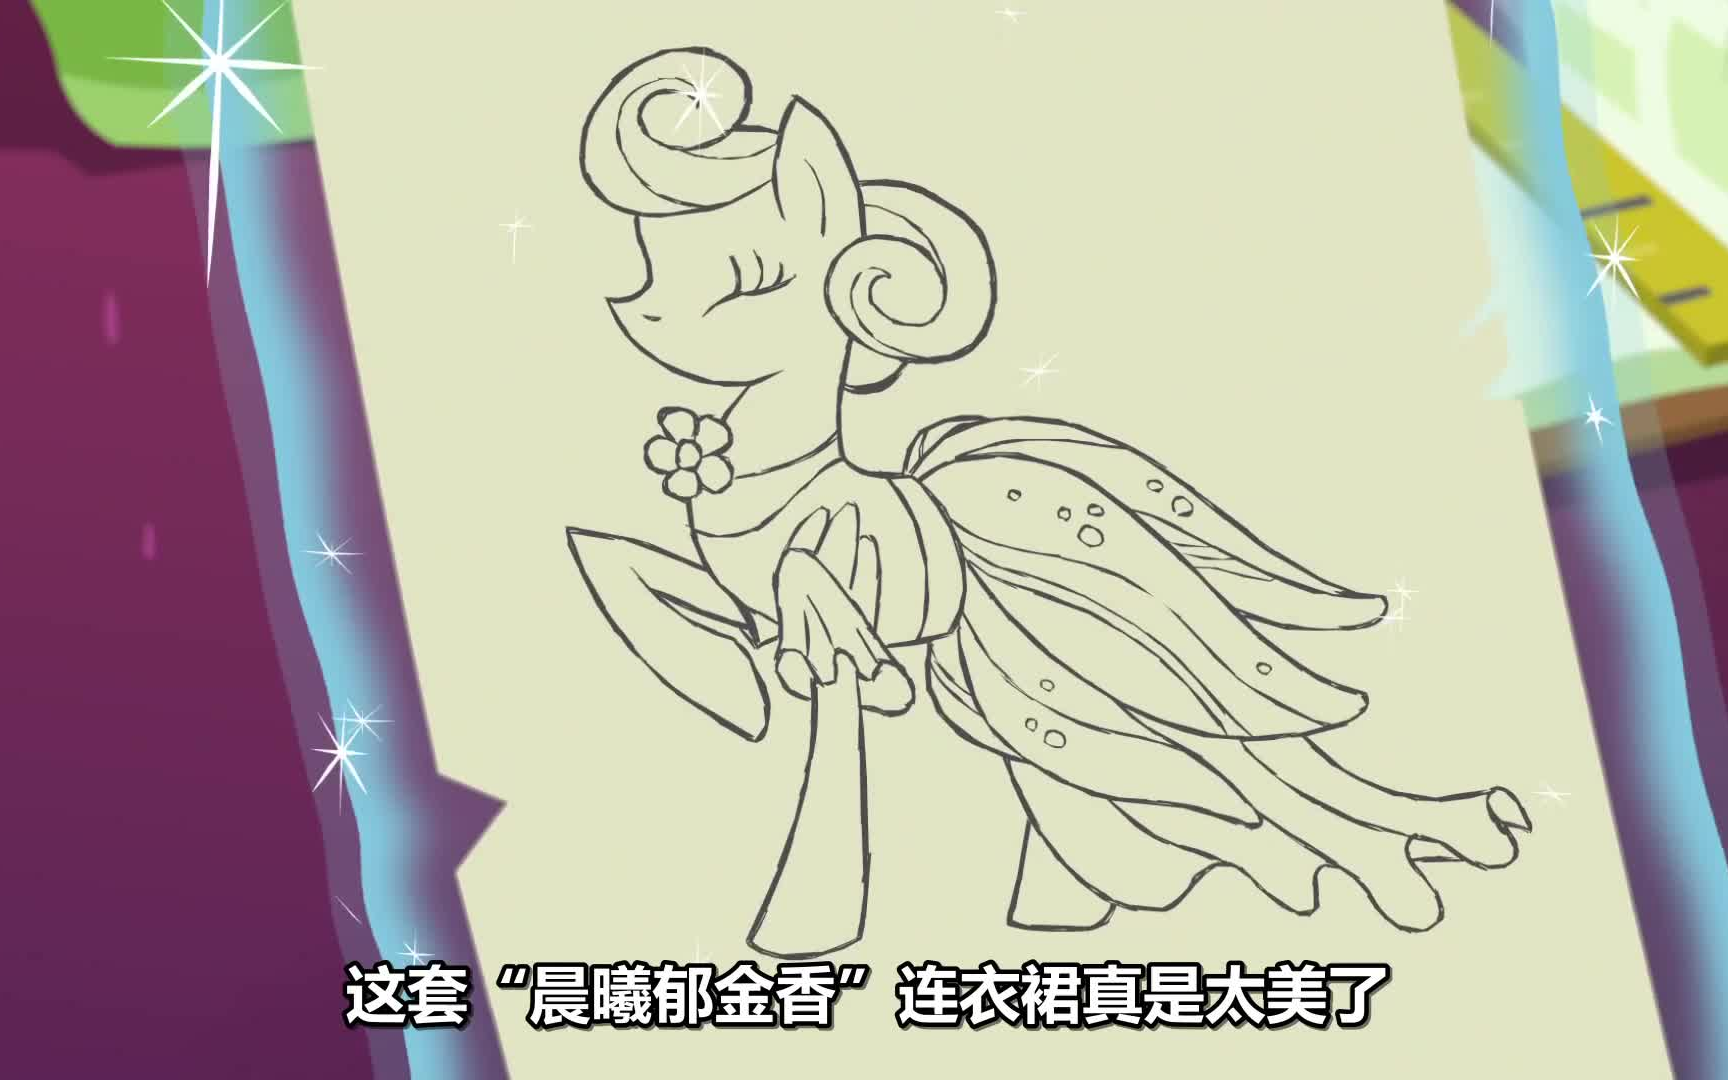 s7e6 时过情存